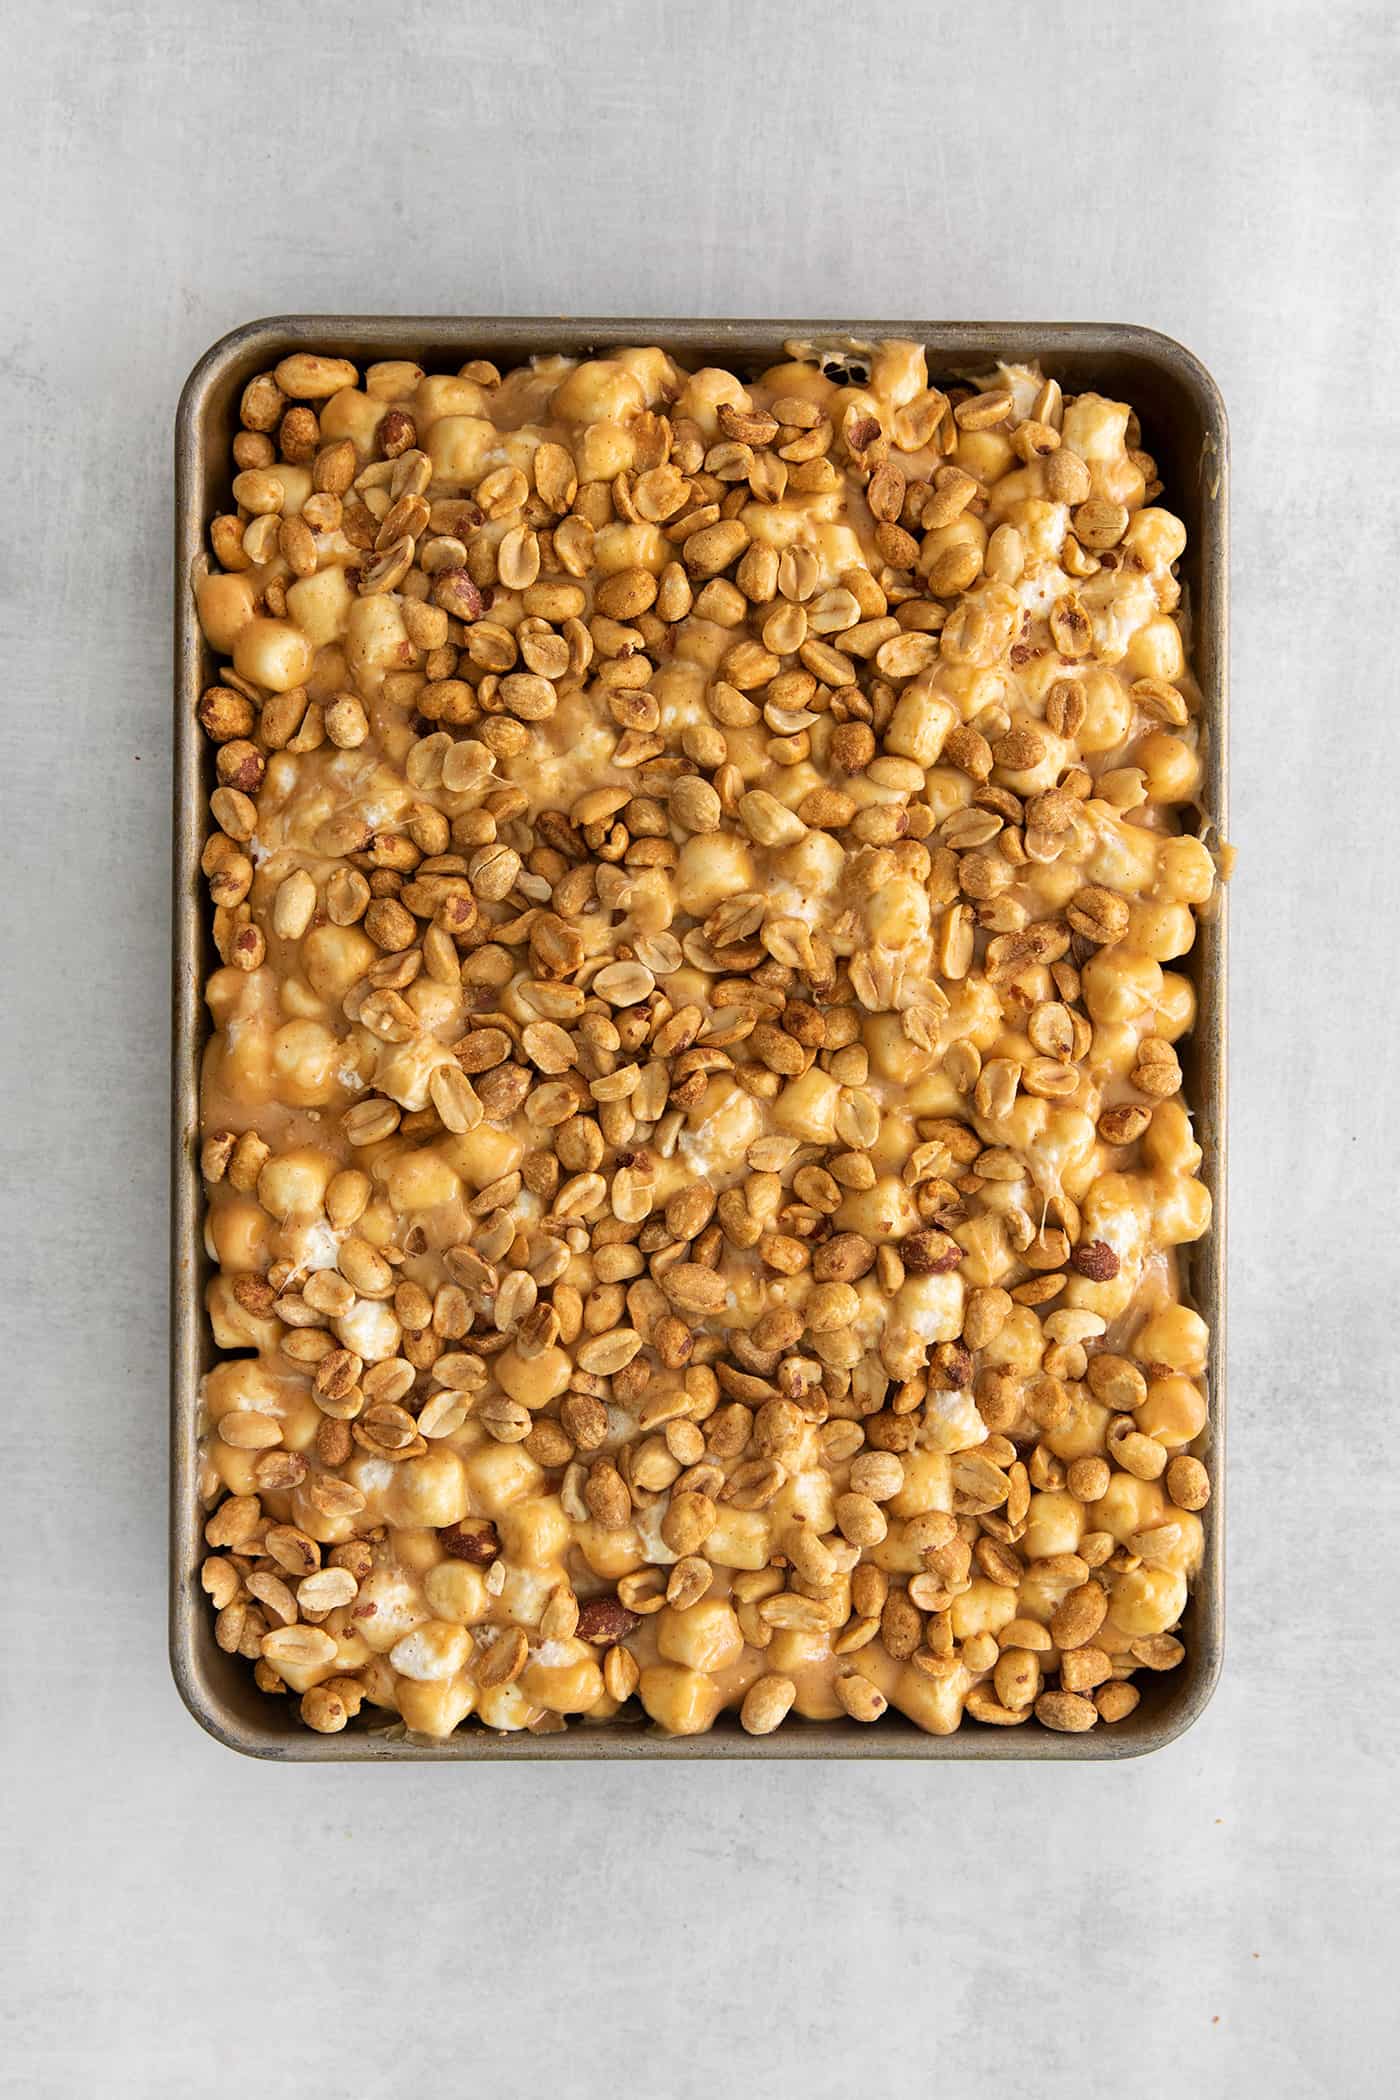 peanuts sprinkled over the top of the salted nut roll bars in a rimmed pan